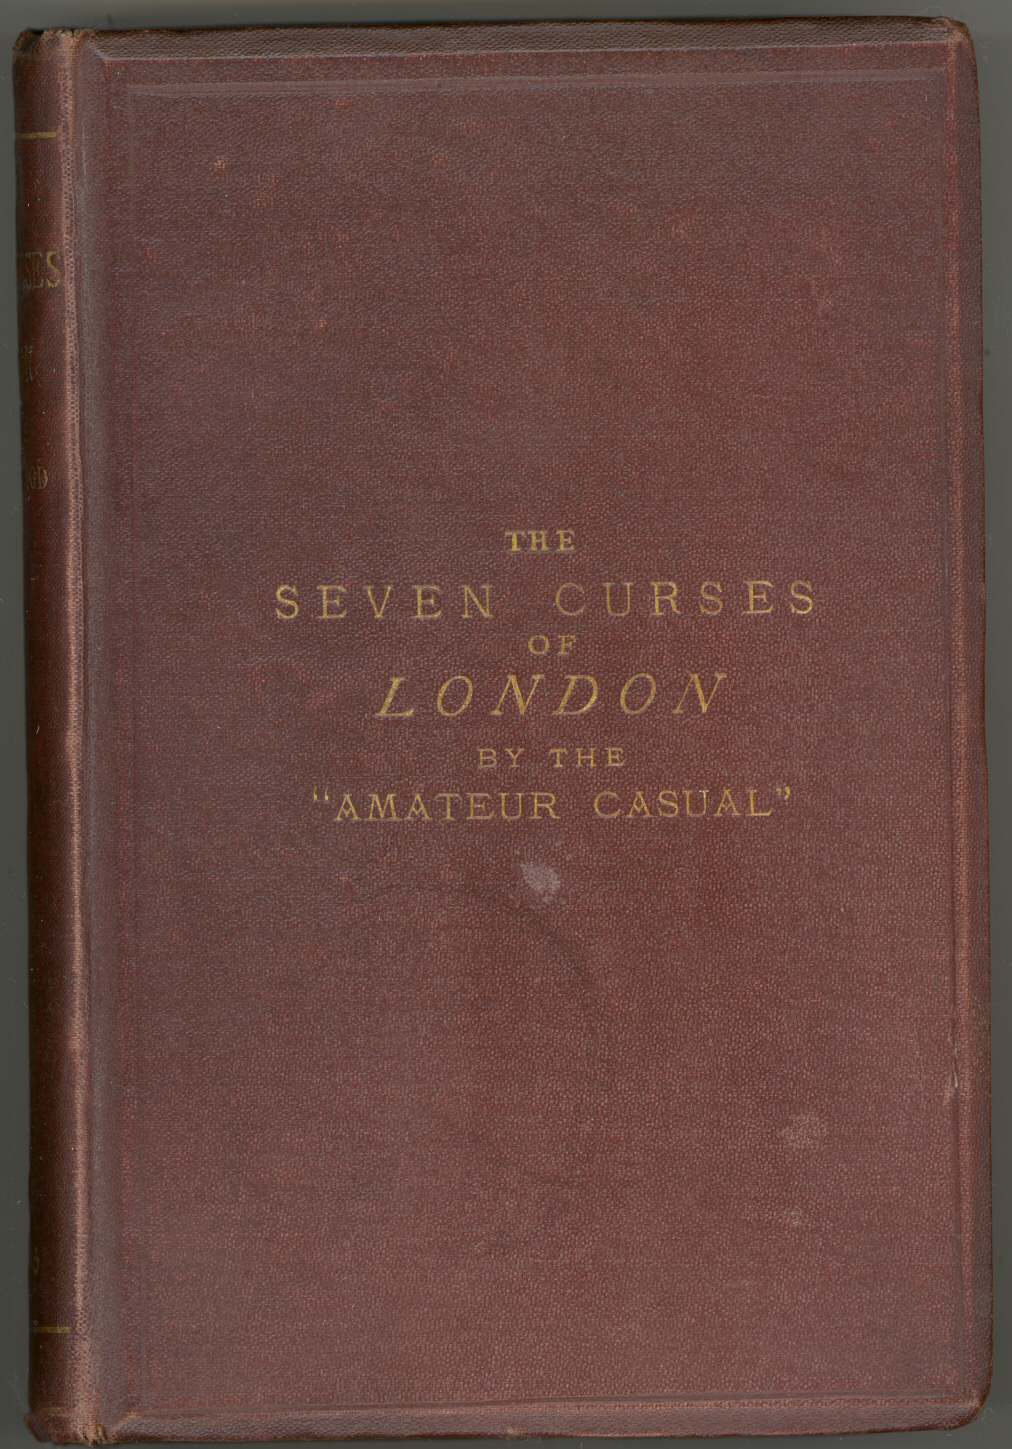 The Seven Curses of London, by James Greenwood